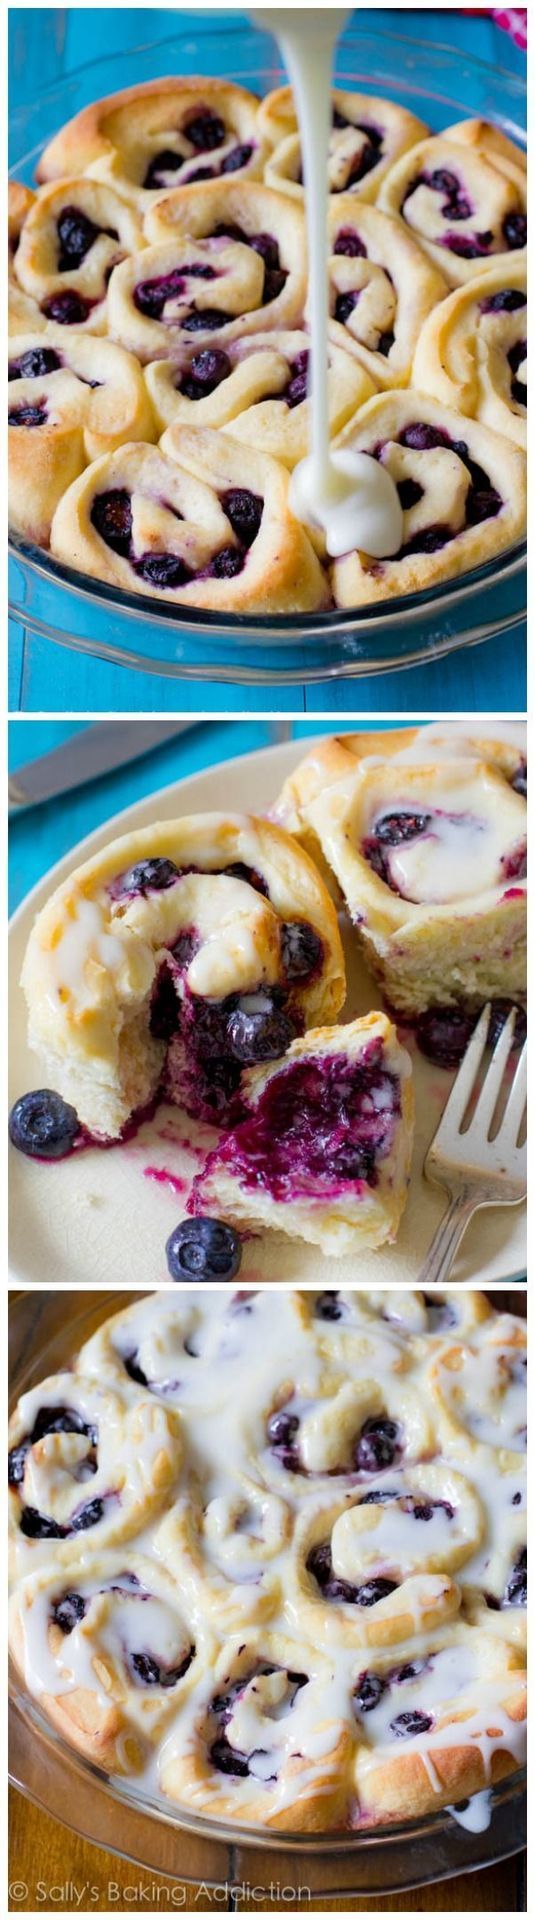 Soft fluffy (and quick!) Blueberry Rolls with Sweet Lemon Glaze. Only 1